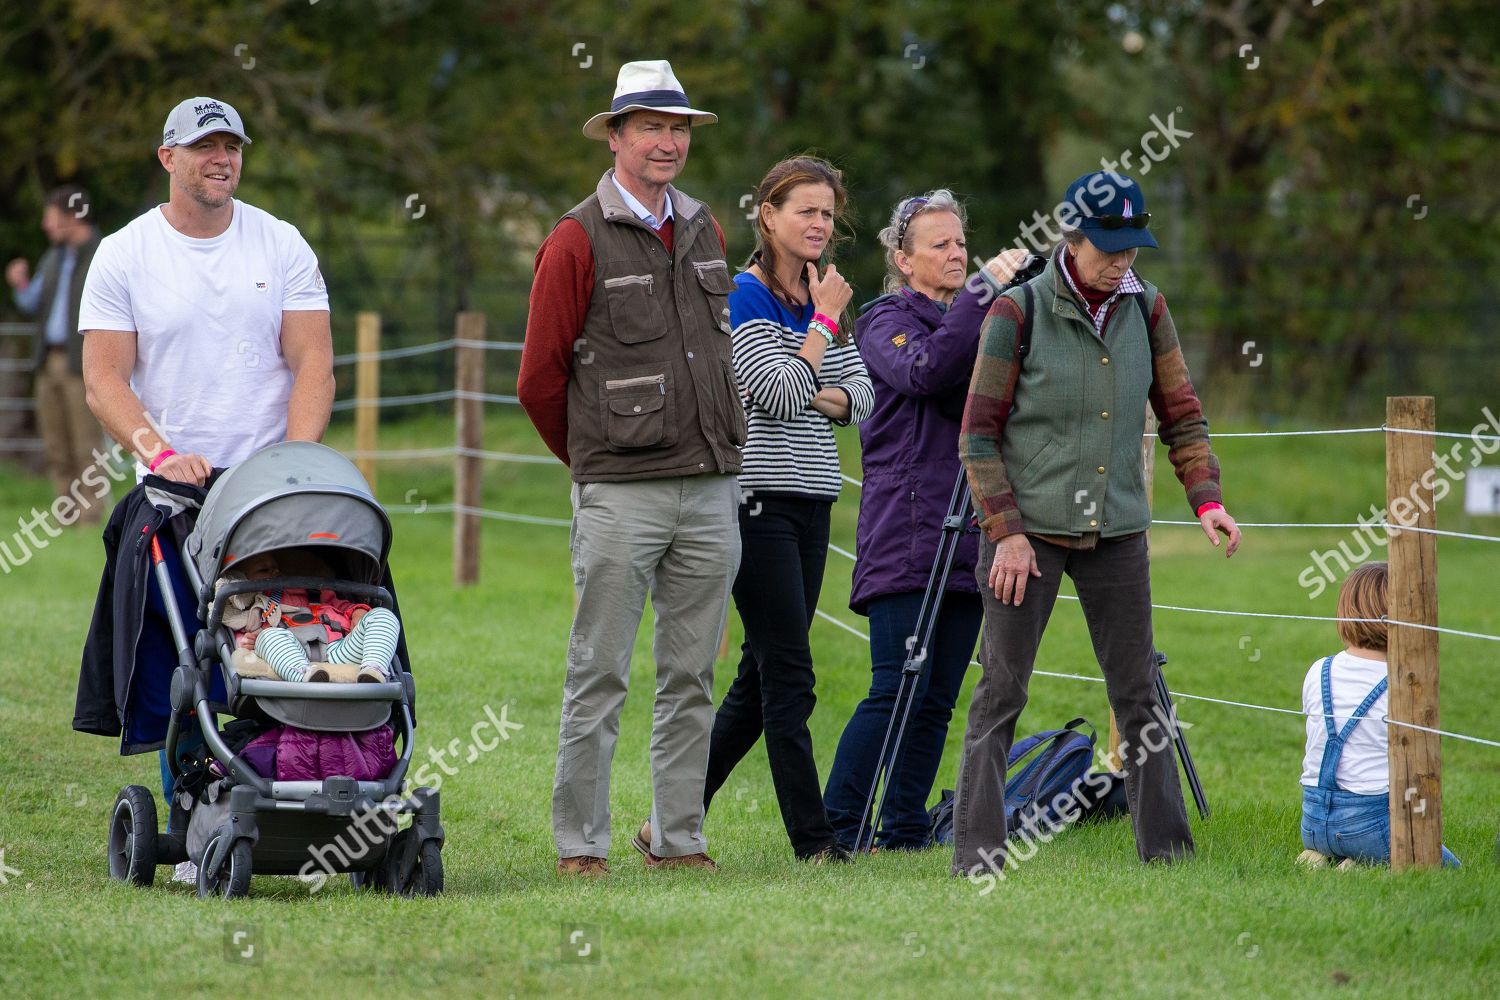 land-rover-burghley-horse-trials-day-3-stamford-lincolnshire-uk-shutterstock-editorial-10403945bs.jpg